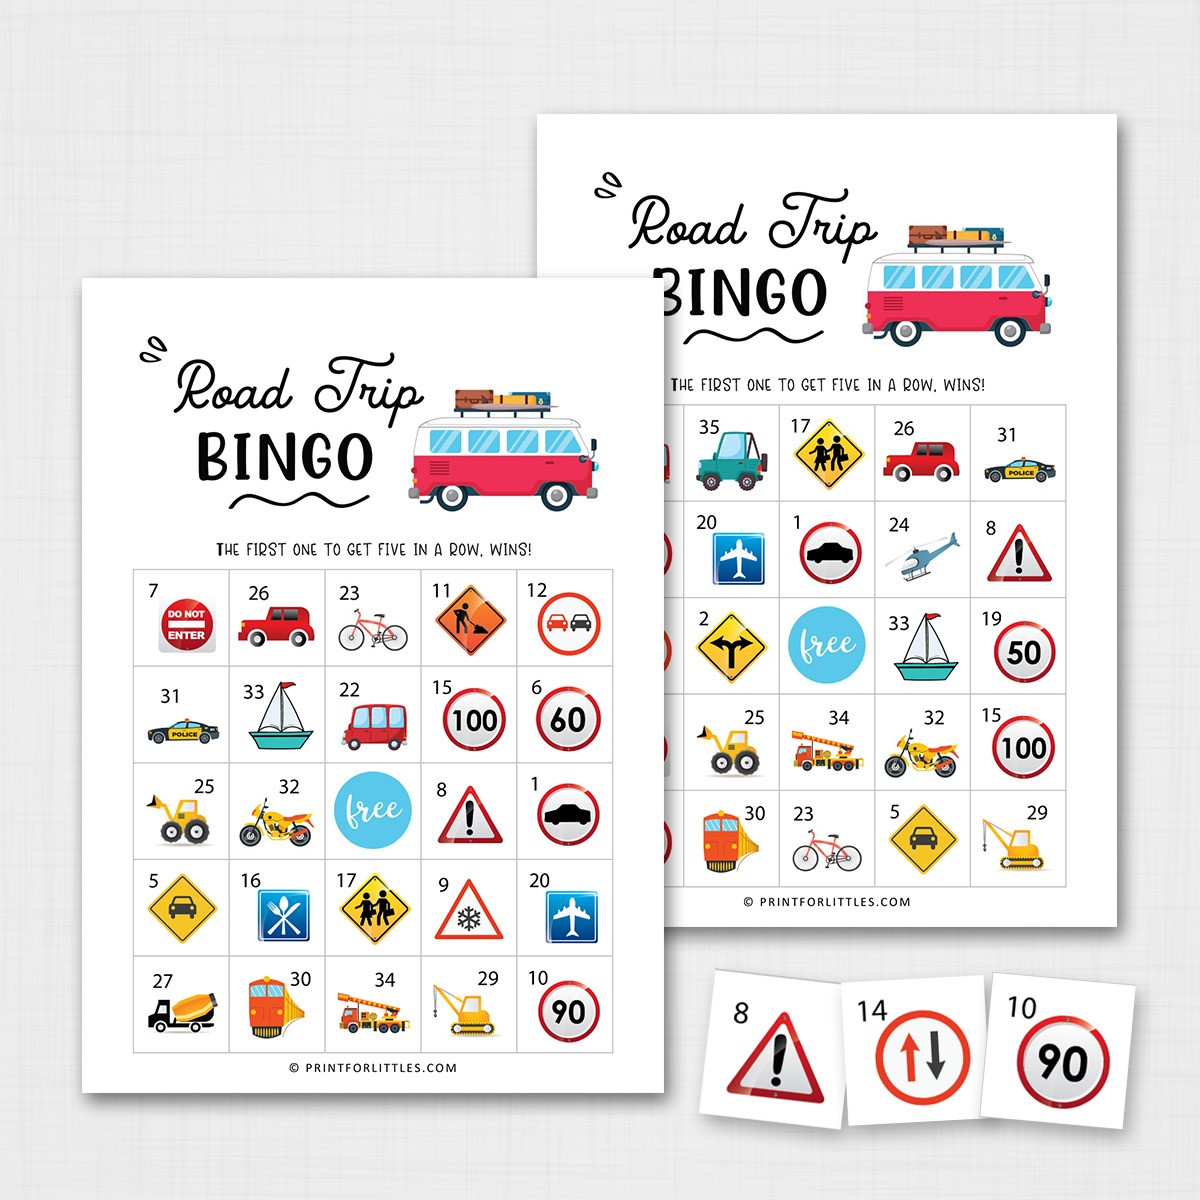 Free Printable Road Trip Games for Kids That Are ACTUALLY Fun!